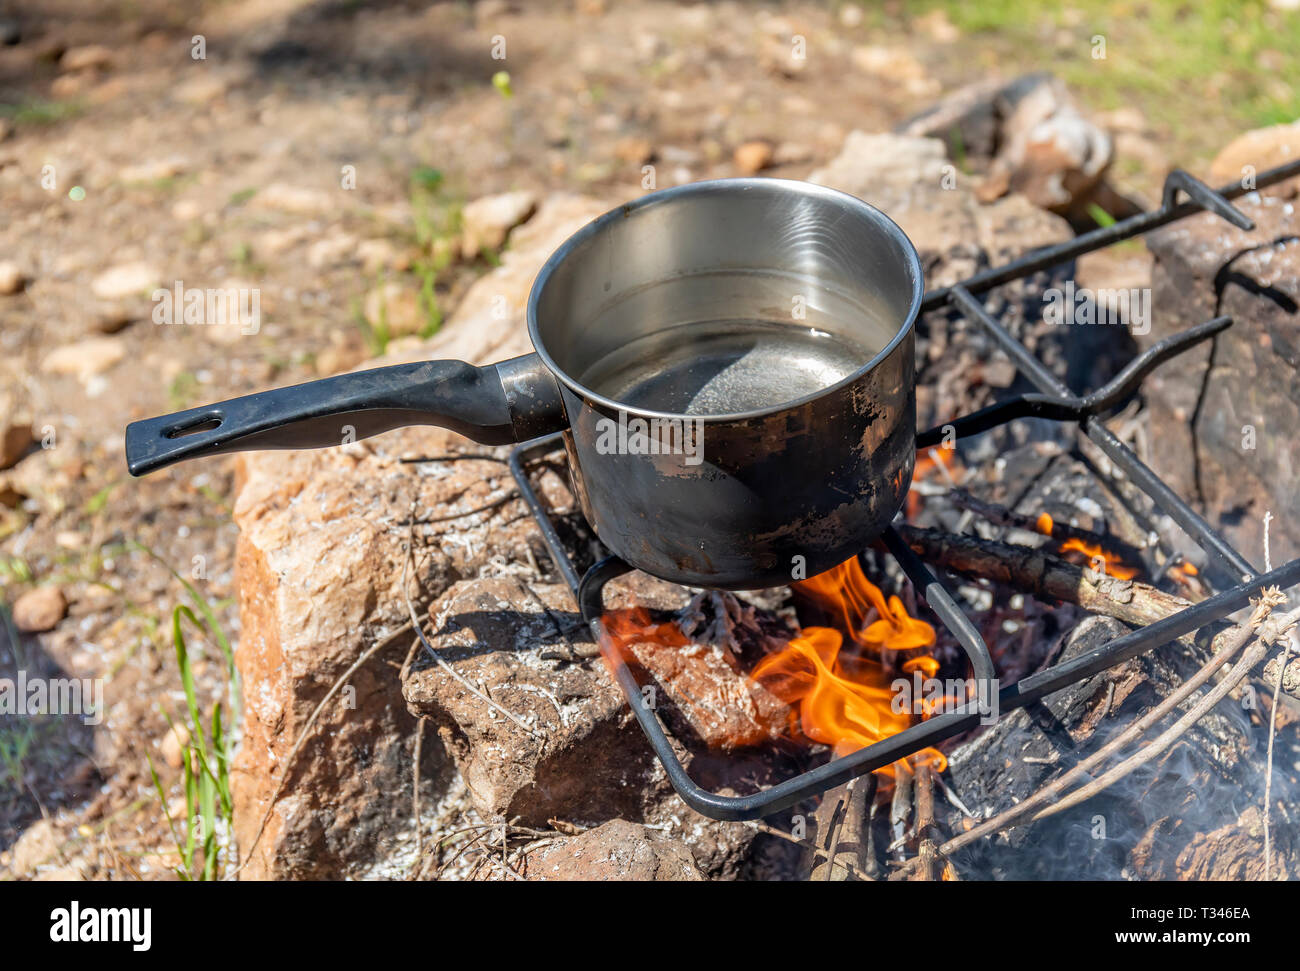 https://c8.alamy.com/comp/T346EA/a-sooty-pot-of-water-about-to-boil-above-a-campfire-T346EA.jpg